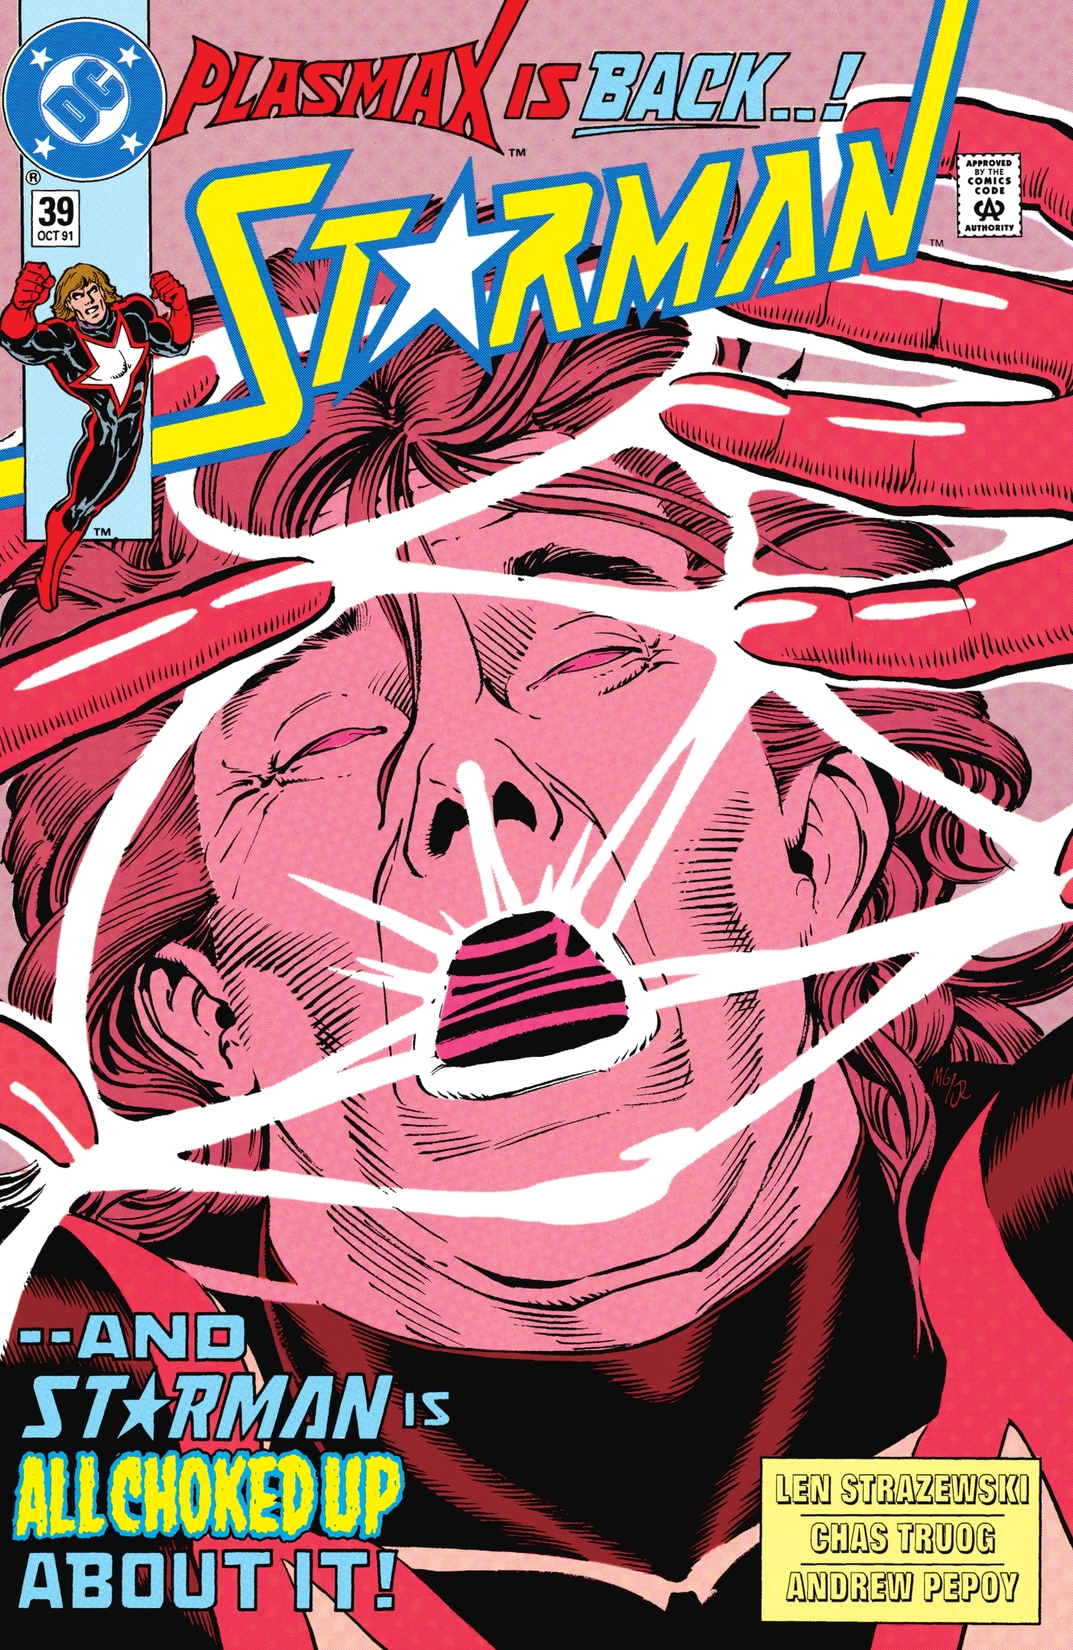 Starman (1988-) #39 preview images